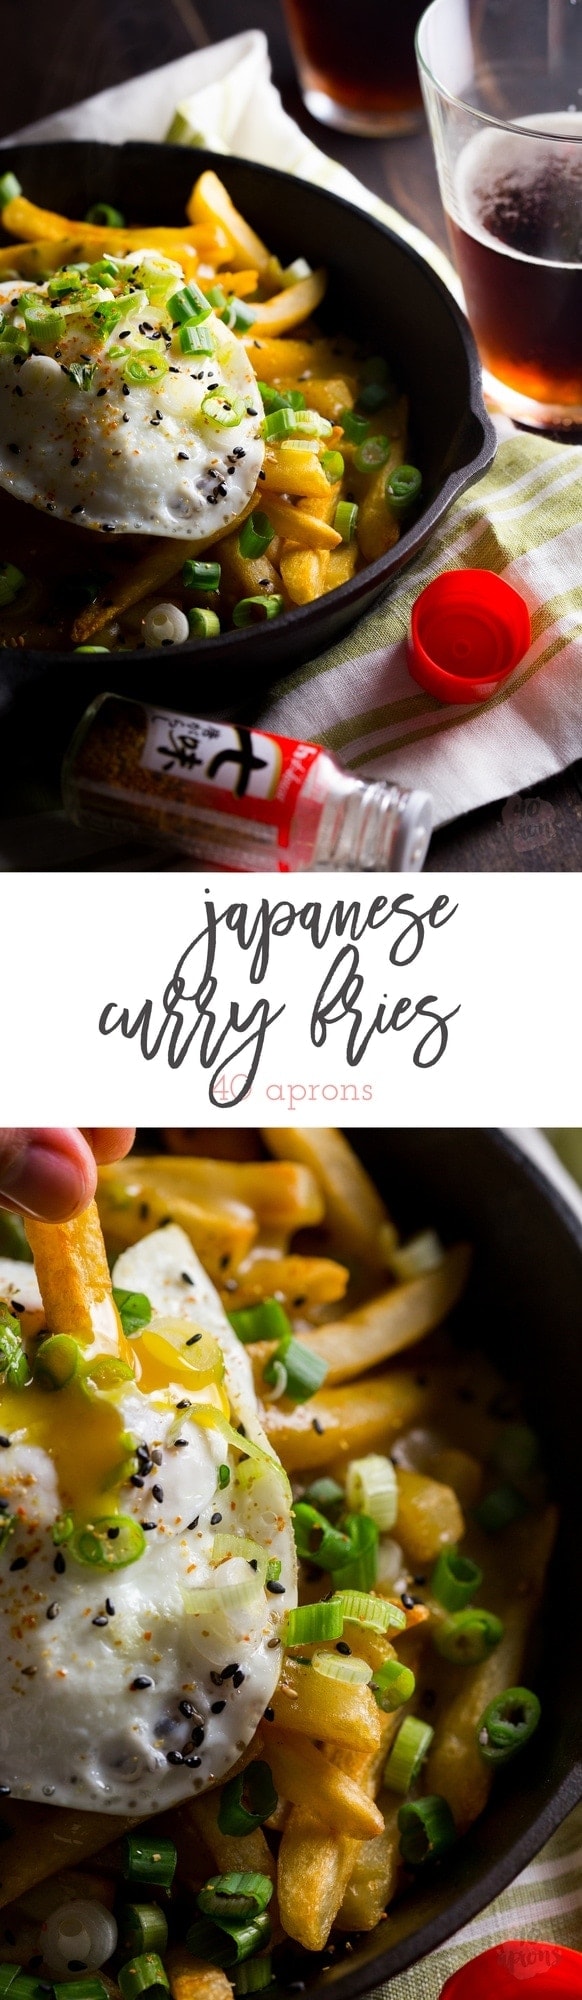 japanese-curry-fries-pinterest